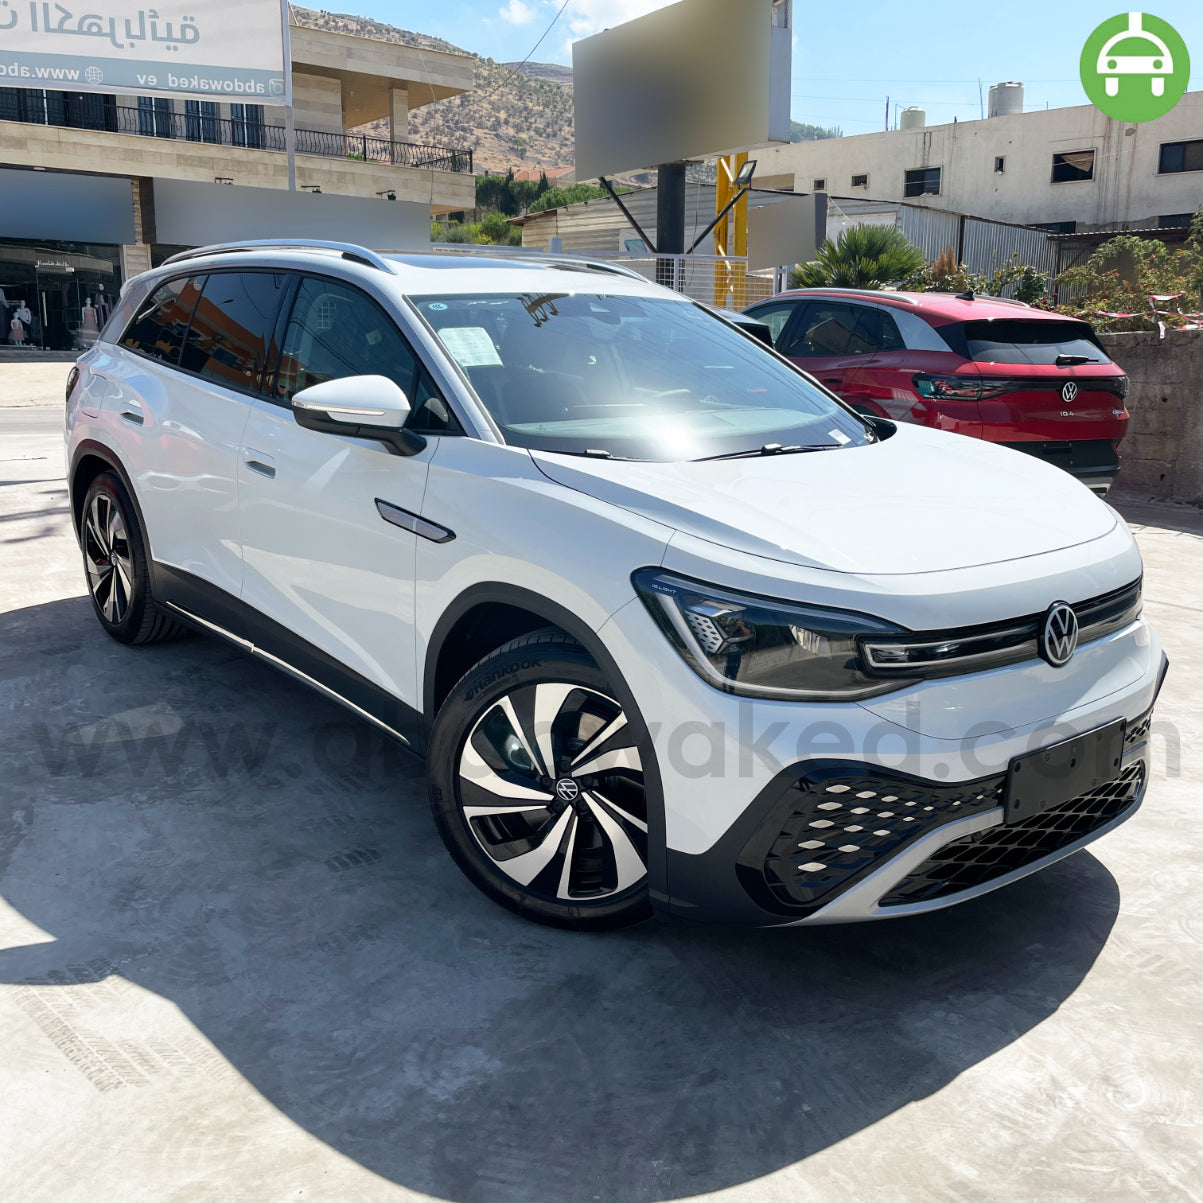 VW ID6 Crozz Pure+ 2022 7-Seater White Color 601km Range/Charge Fully Electric Car (New - 0KM)